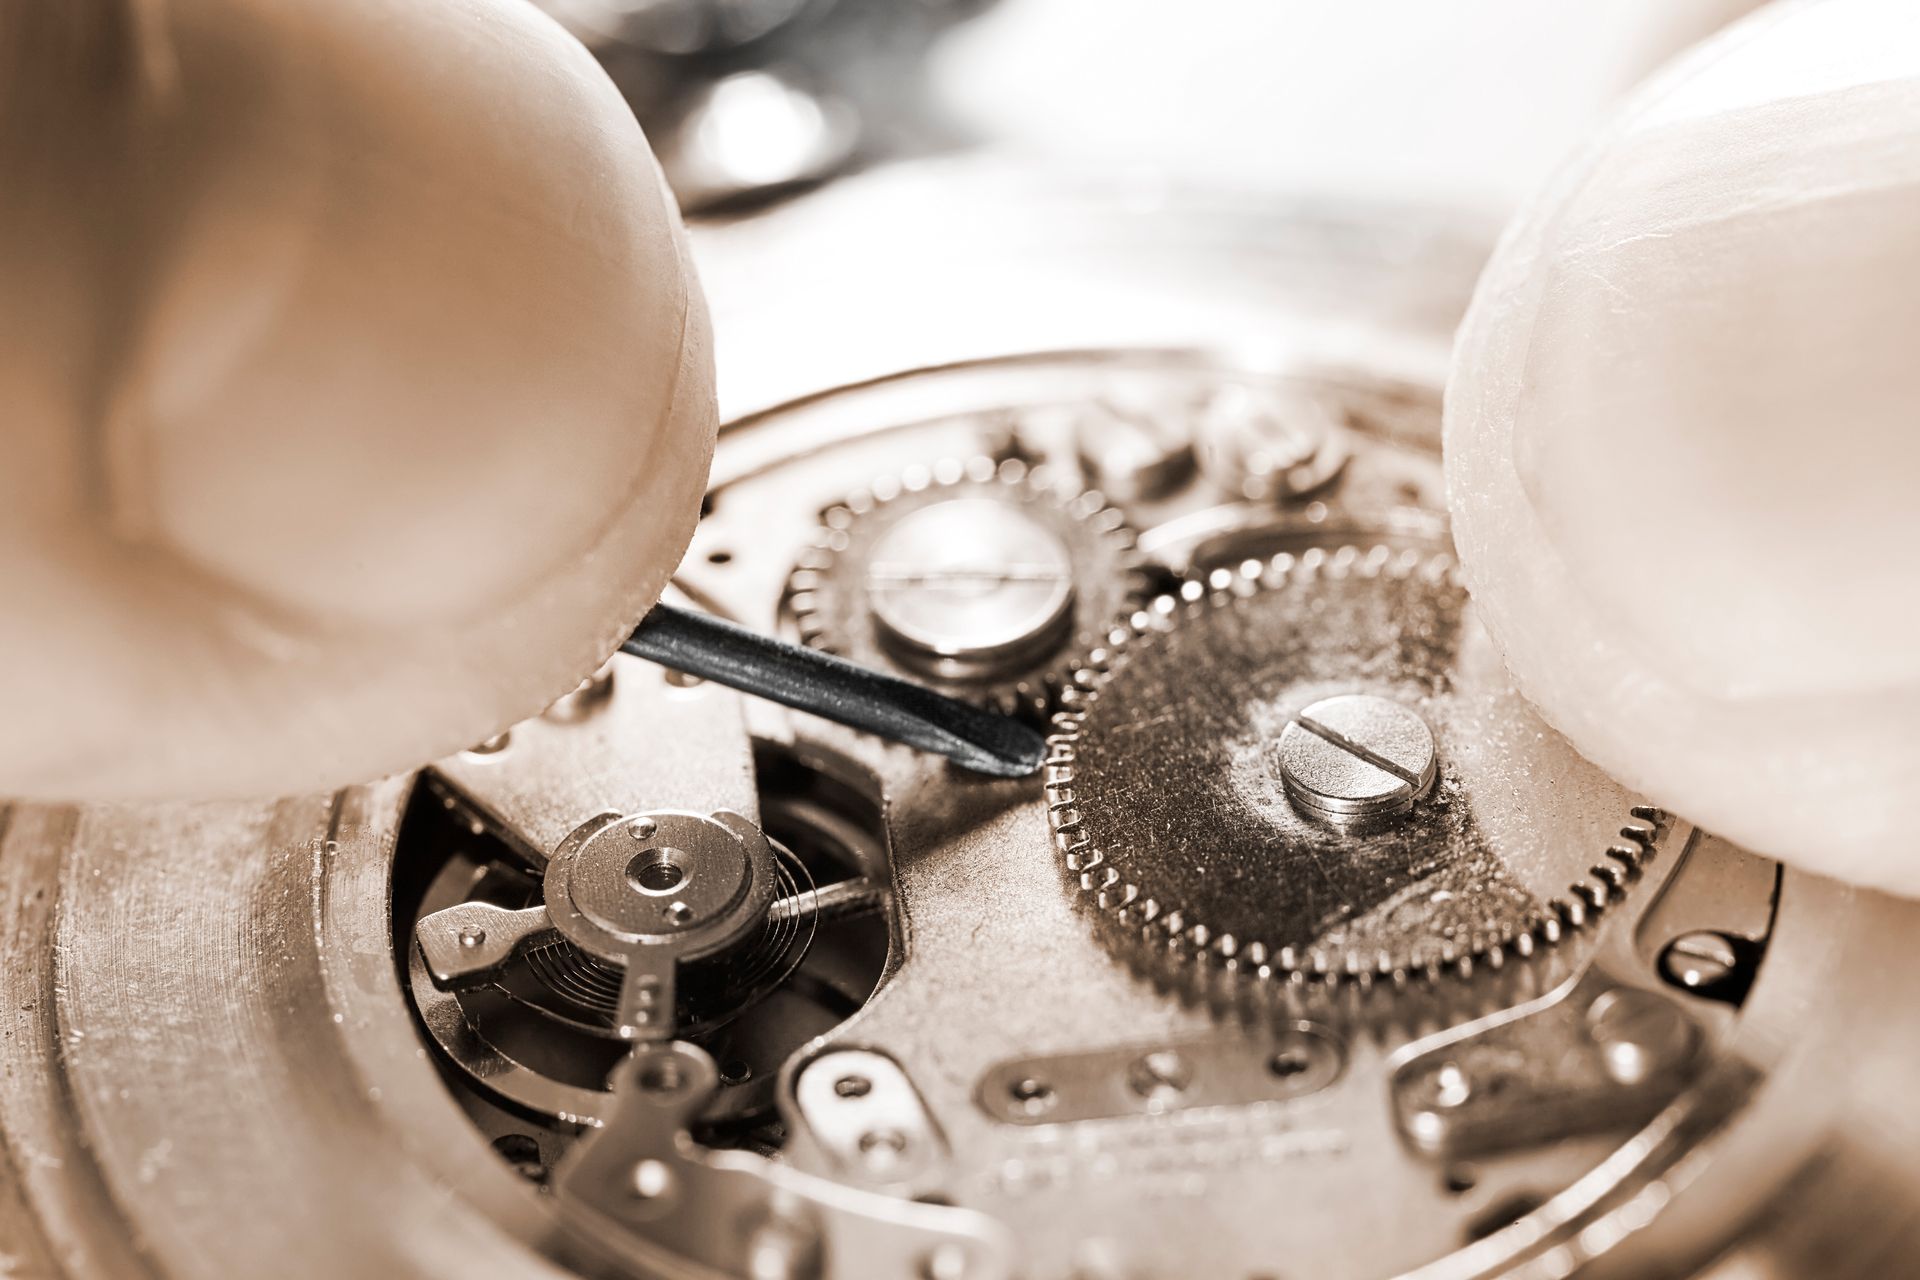 Watch Repair— Hand of a Man Repairing Watches in Palm Harbor, FL